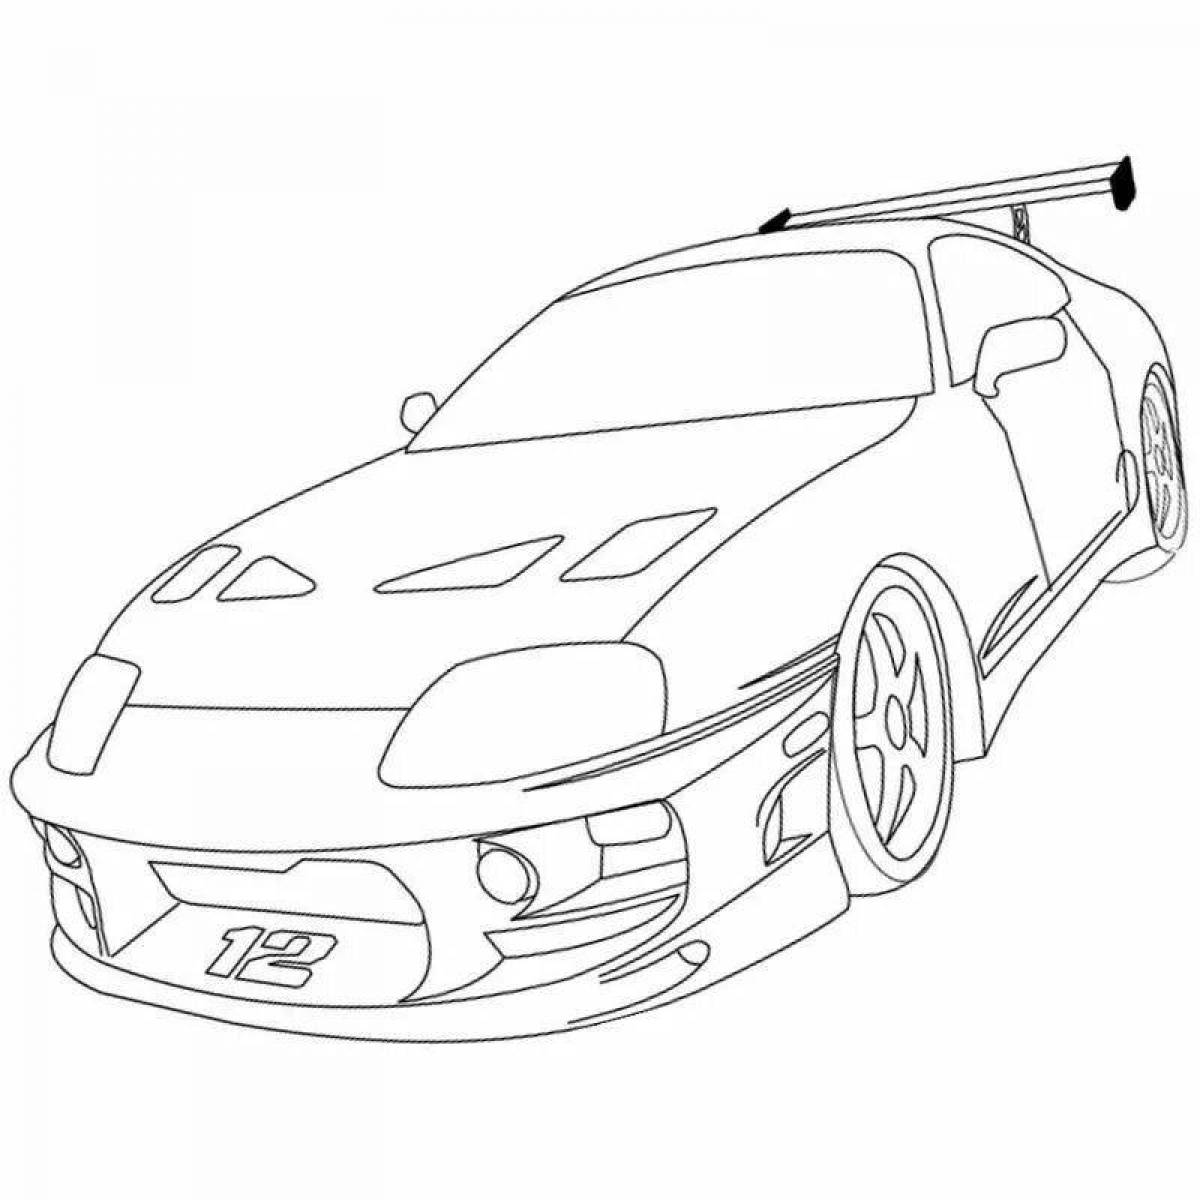 Toyota supra from afterburner #7